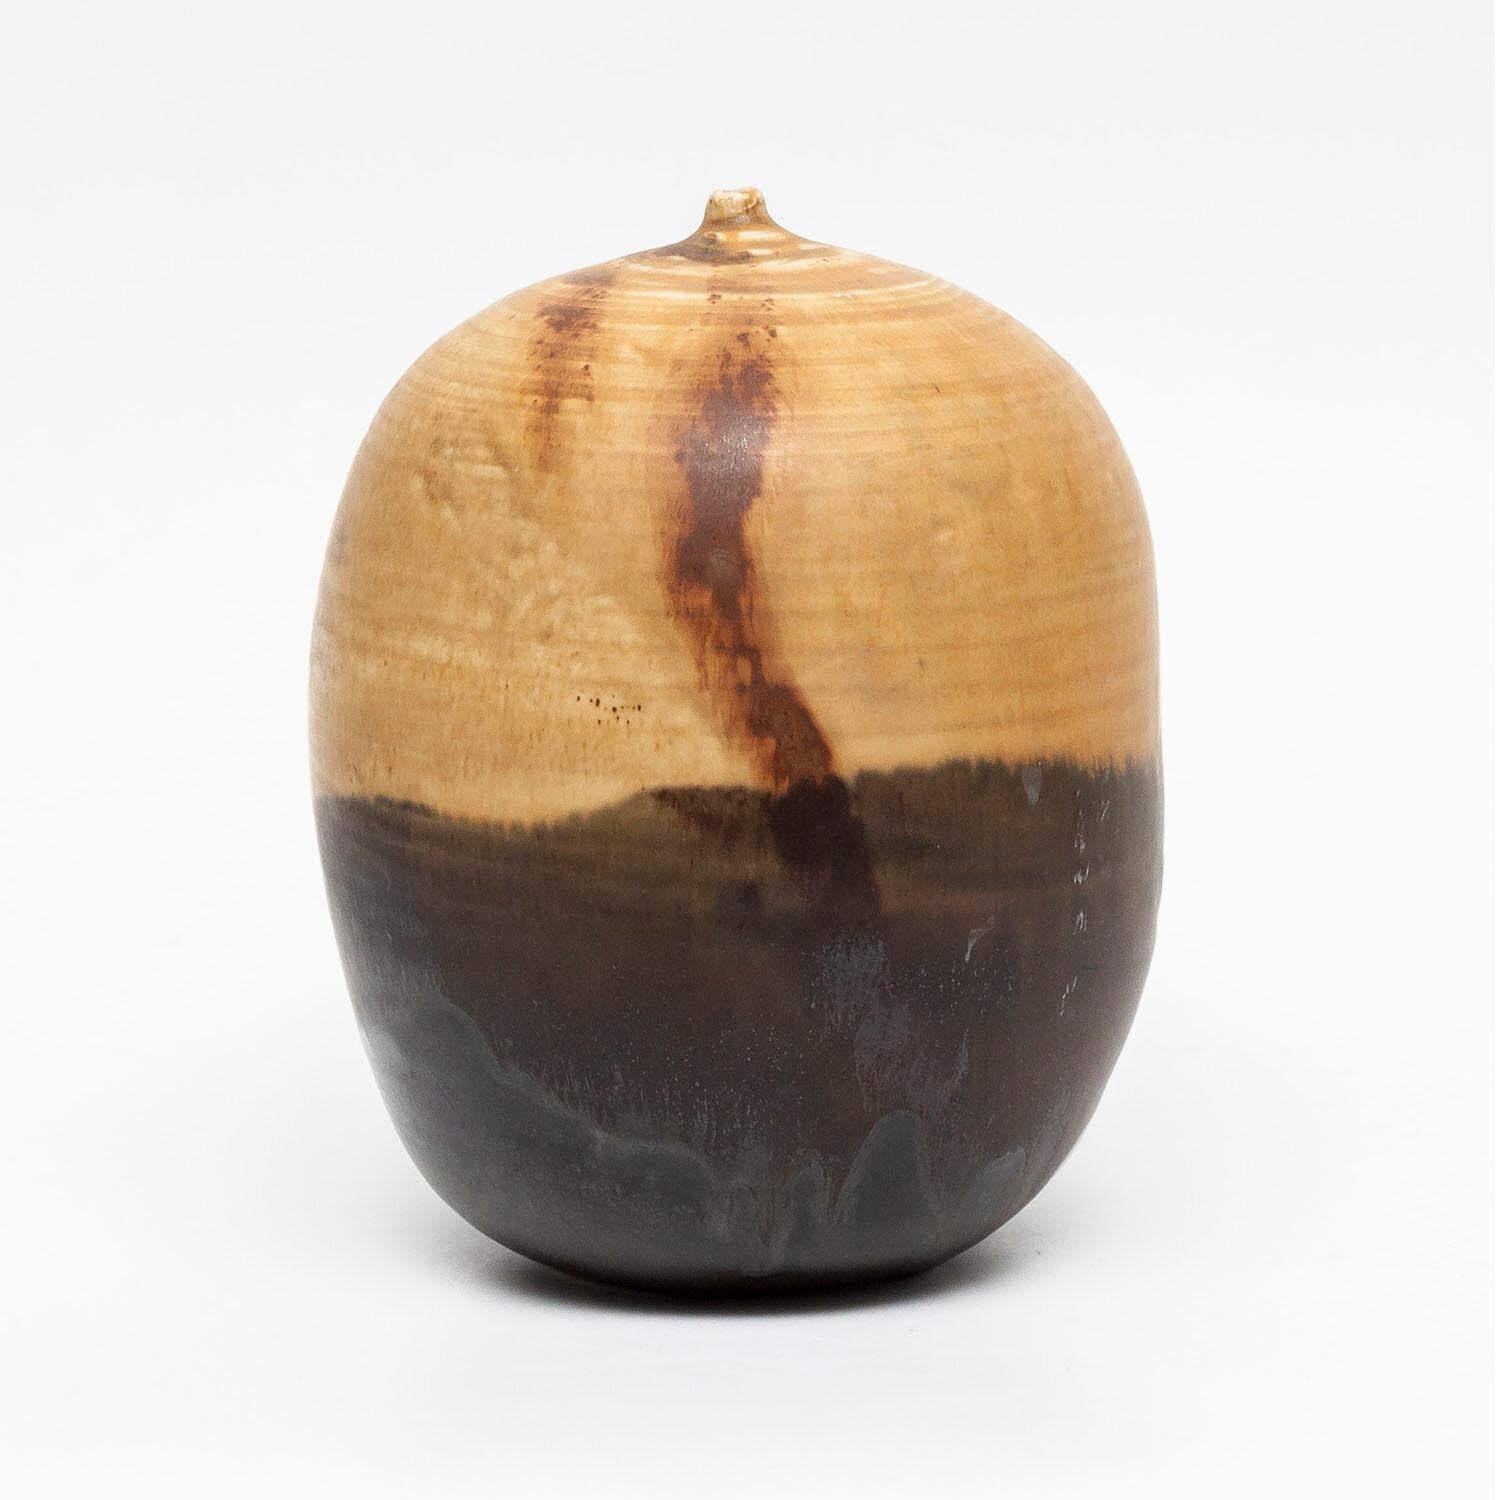 Moonpot (INV-NP2434)
Rare
porcelain and glaze
7 x 5.5 x 5.5”
signed
date unknown

Toshiko Takaezu (June 17, 1922 – March 9, 2011) was an American ceramic artist and painter. She was born to Japanese immigrant parents in Pepeekeo, Hawaii, in 1922.